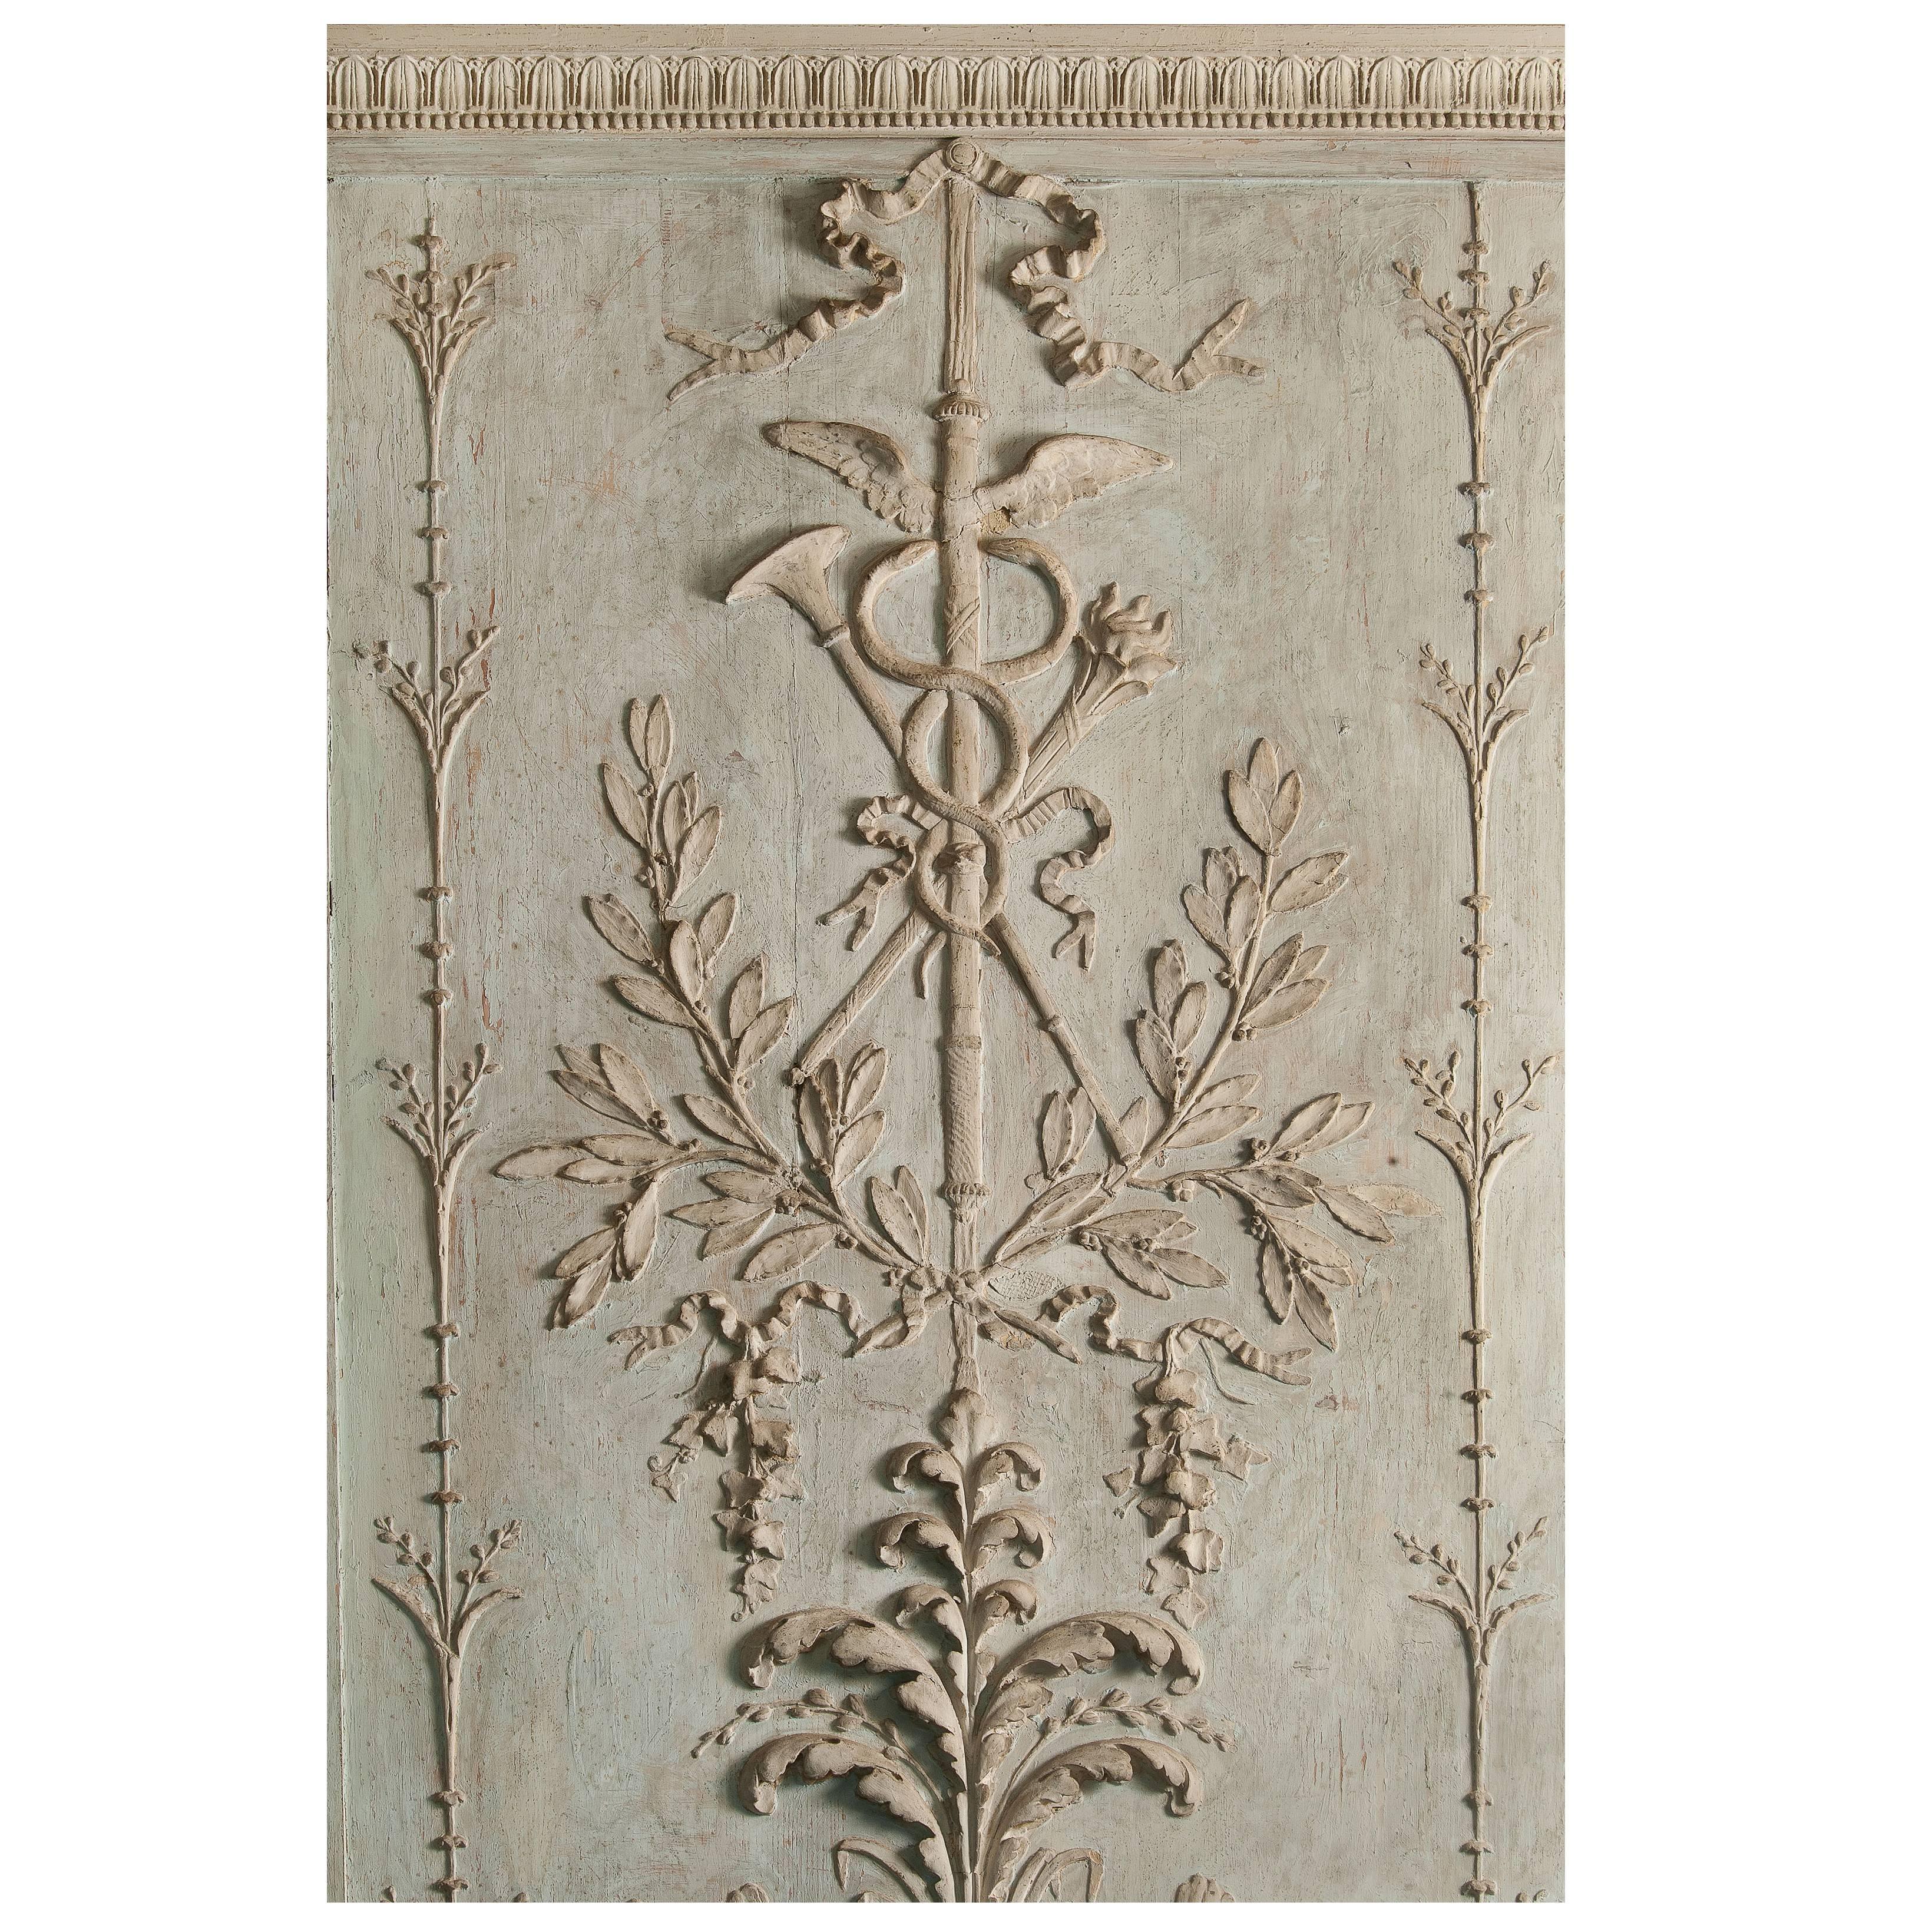 Beautiful Wood Panelling Decoration in Oak, Louis XVI Style, 18th Century For Sale